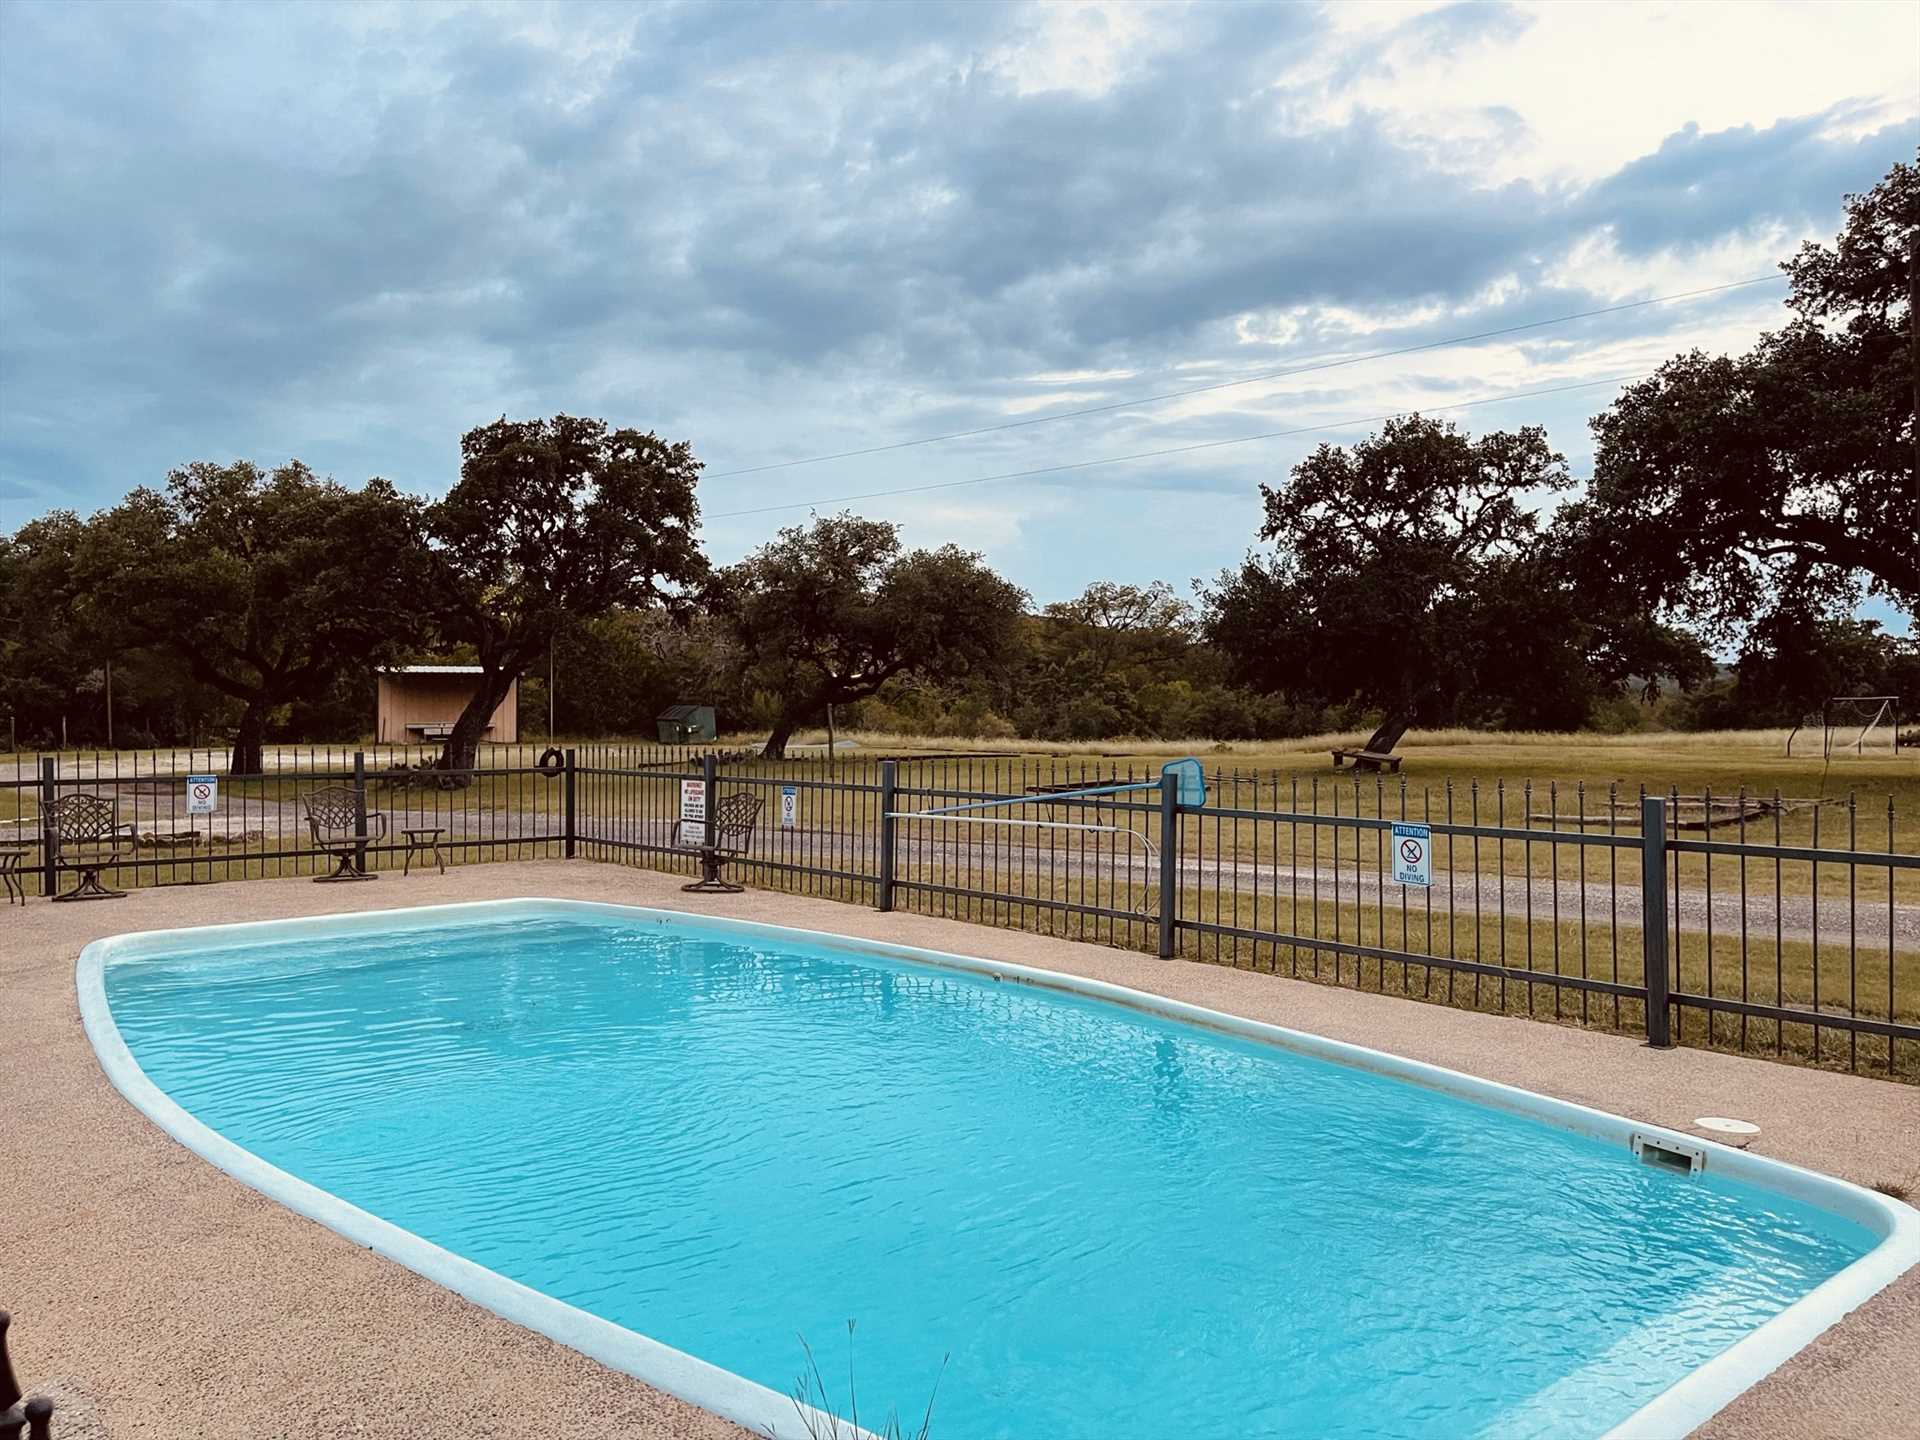                                                 Make a splash-and take the edge off those hot Texas summers-with a cool swim in the crystal-clear pool.